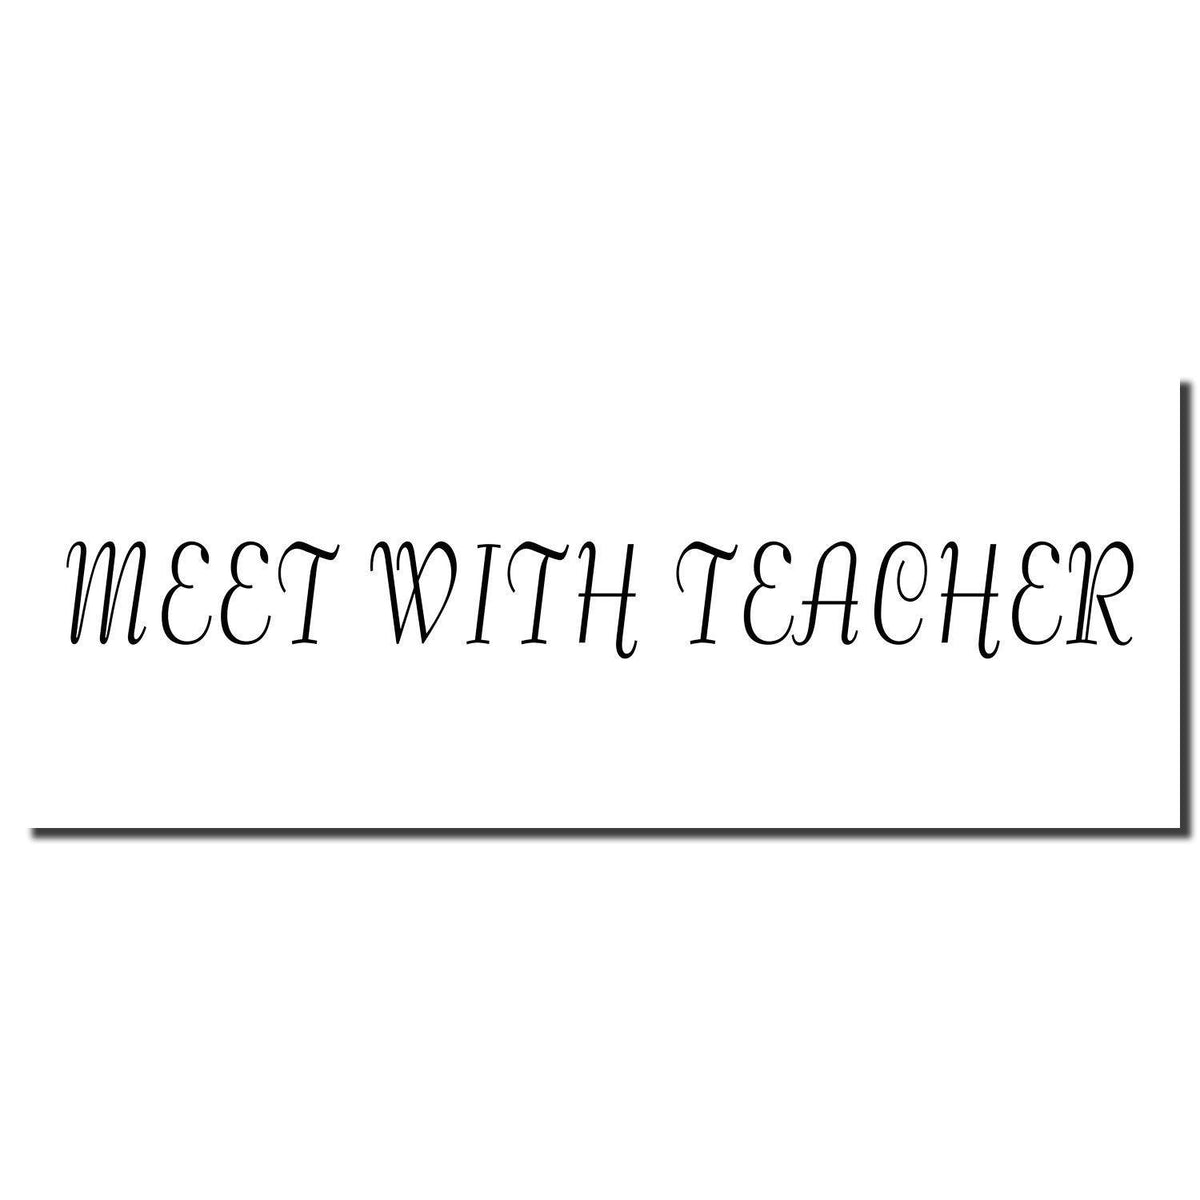 Enlarged Imprint Large Meet With Teacher Rubber Stamp Sample